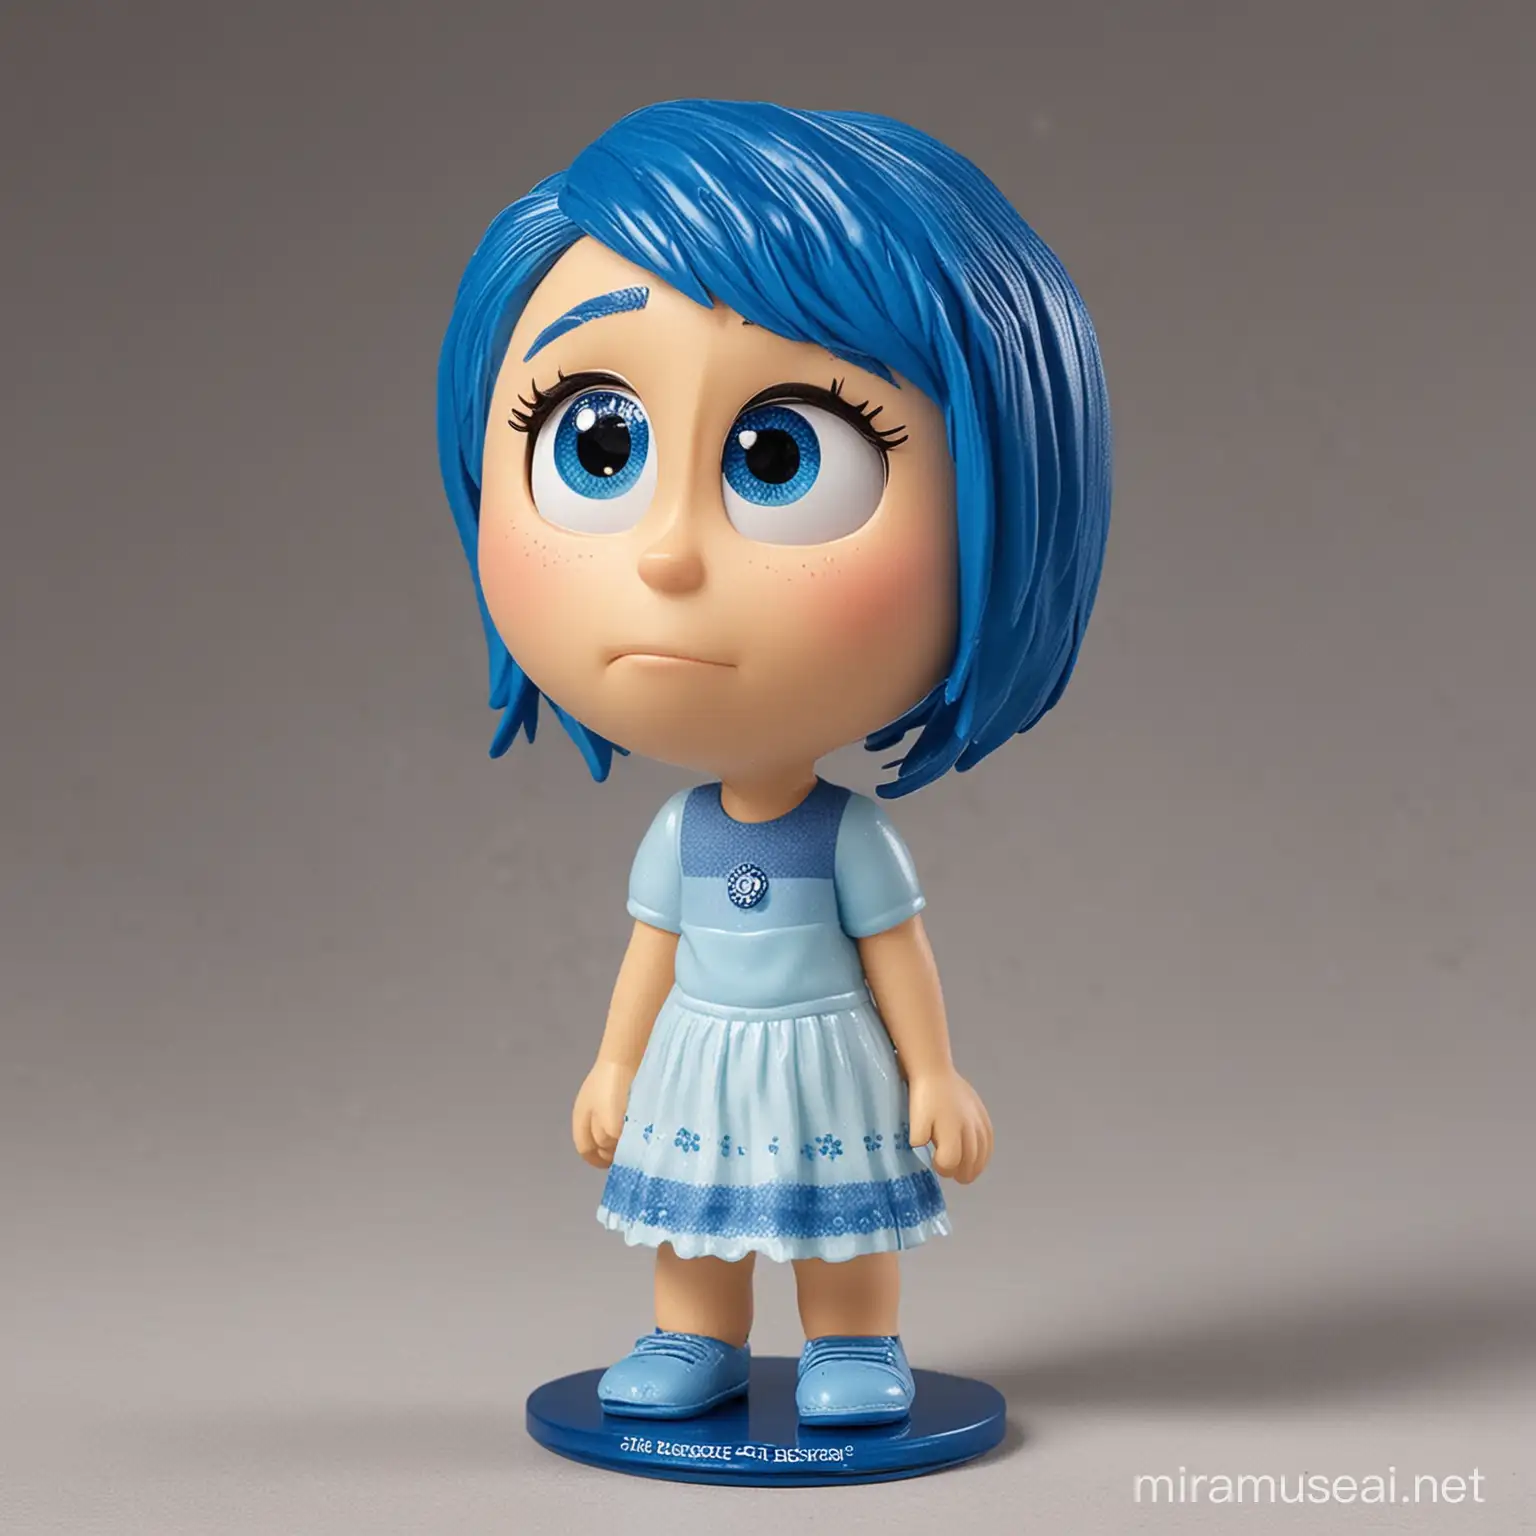 Inside out Sadness Bobblehead toy